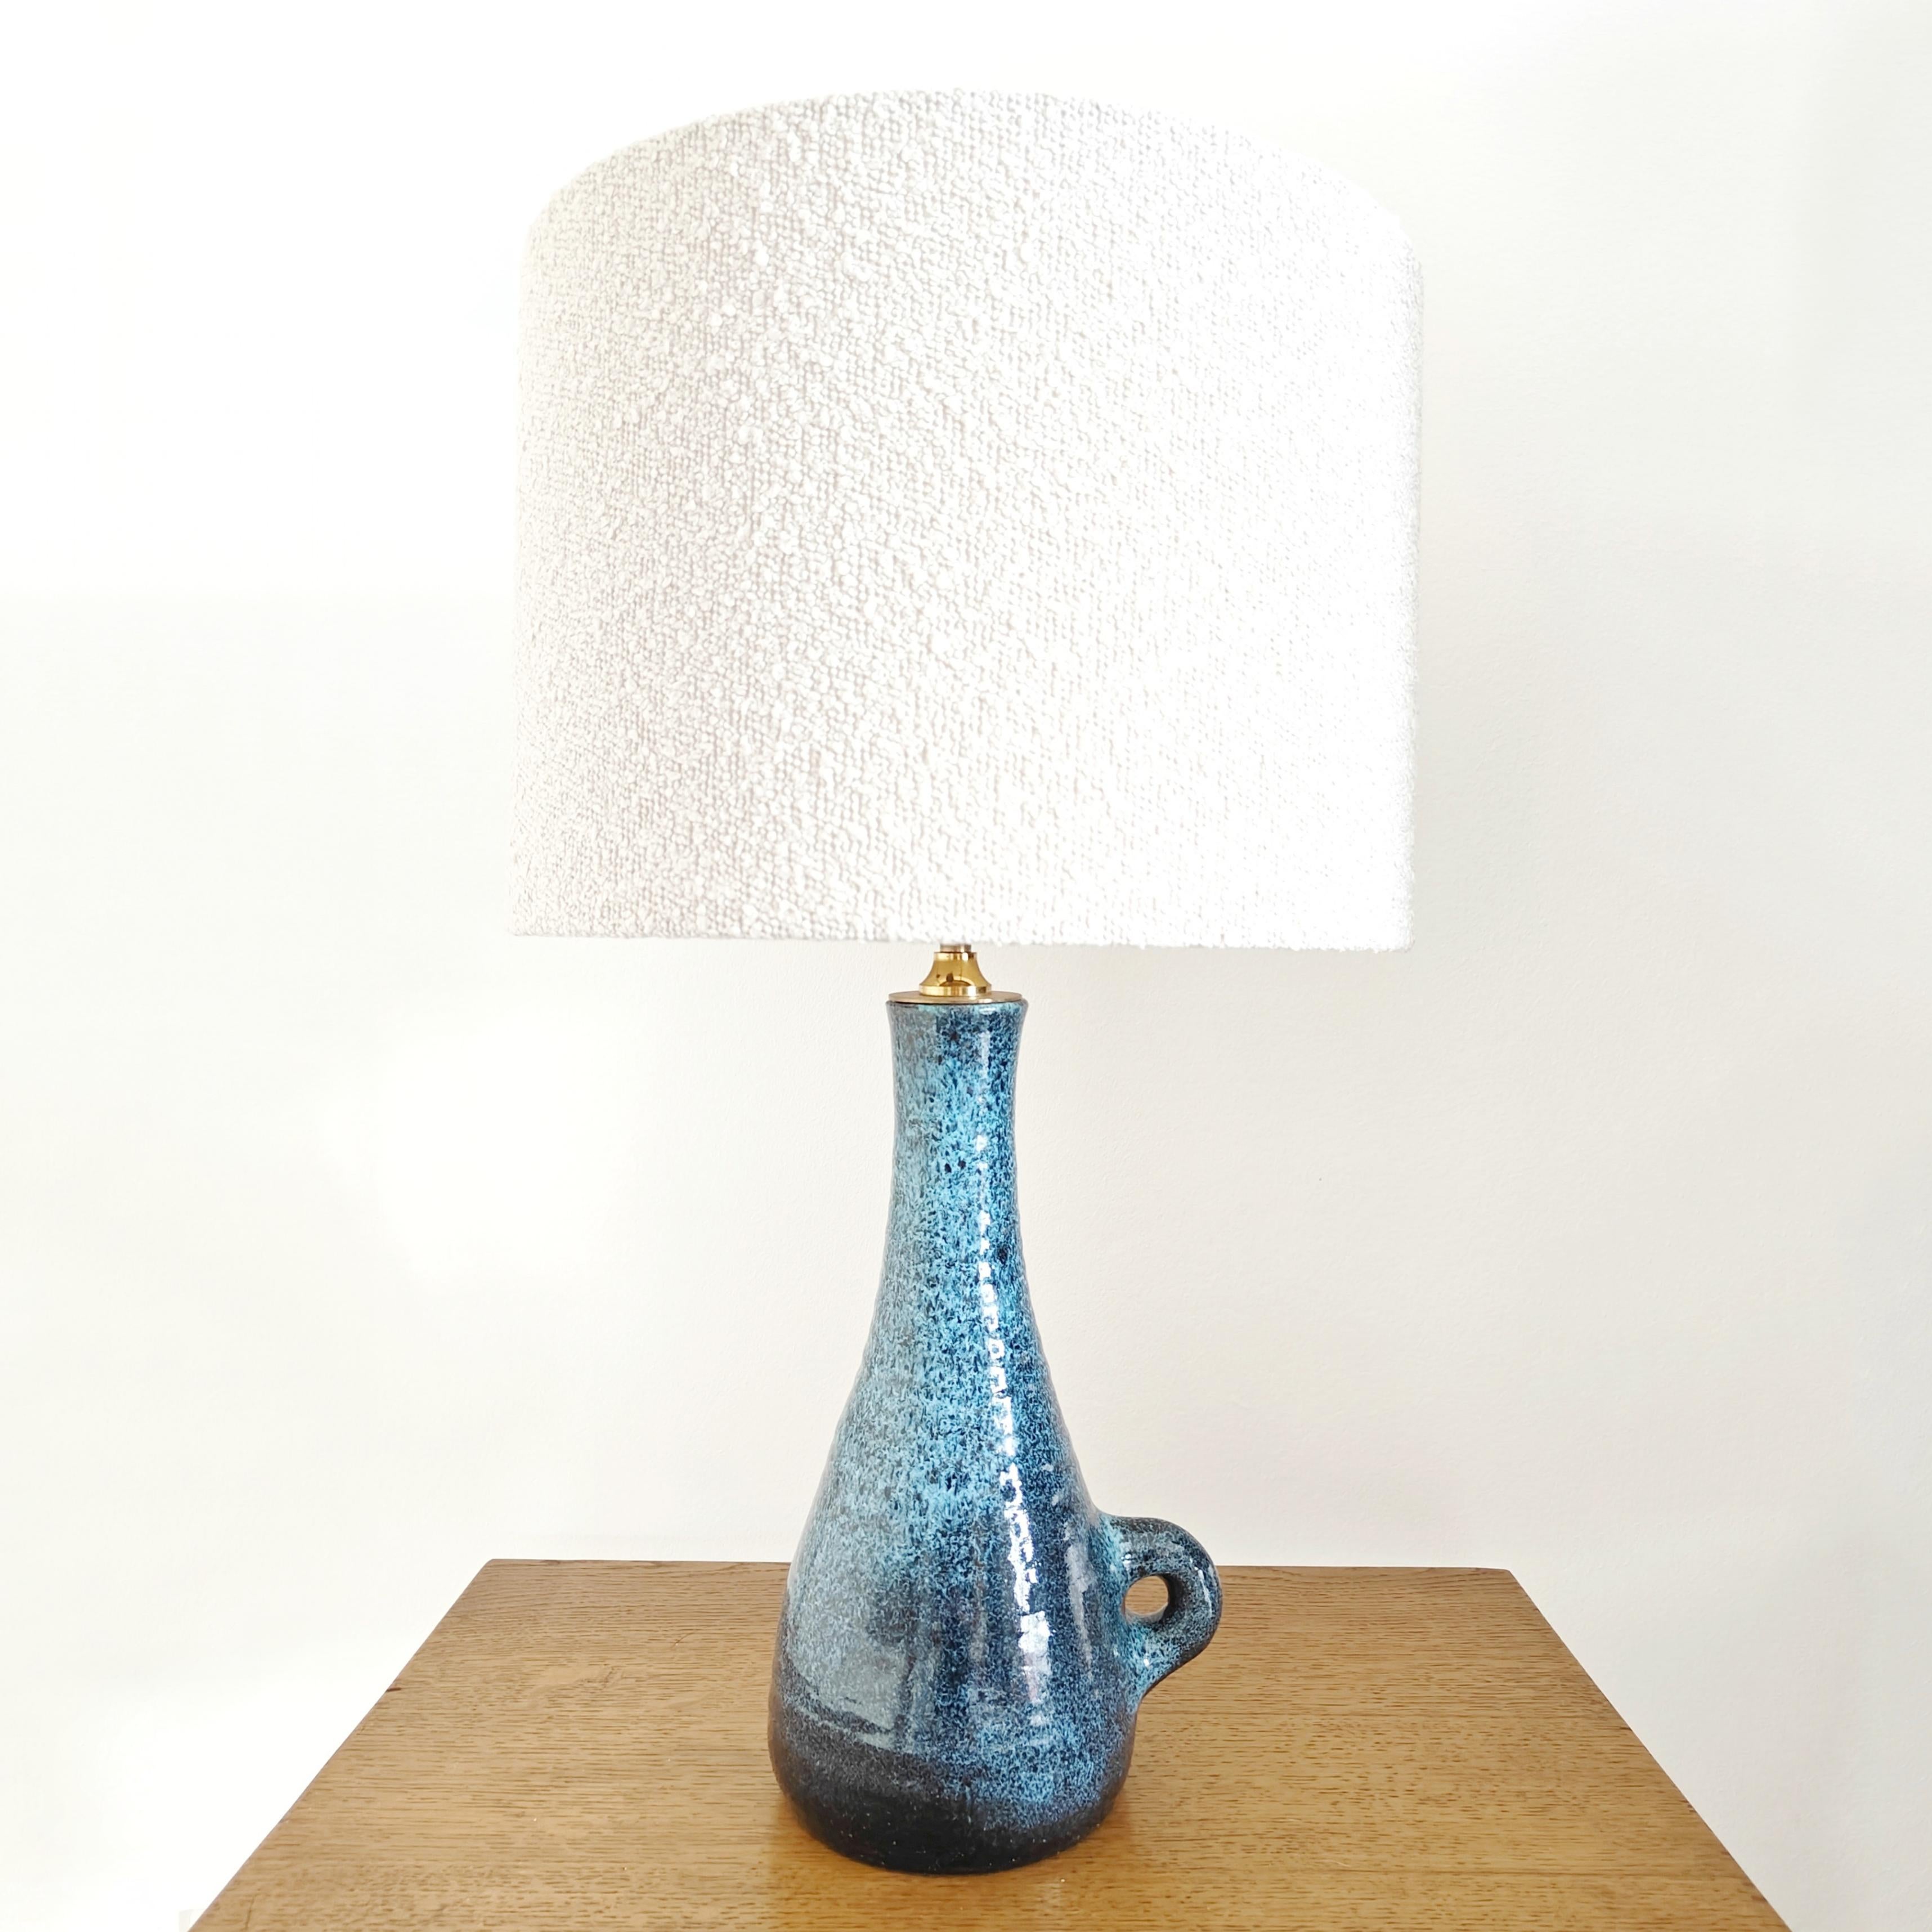 Beautiful 1960s ceramic lamp with enamel finish, made by the potters of Accolay. 
This lamp is adorned with speckled blues and features a decorative handle, resembling some works by Jacques Blin.
Its dimensions are ideal for a chic decoration. The